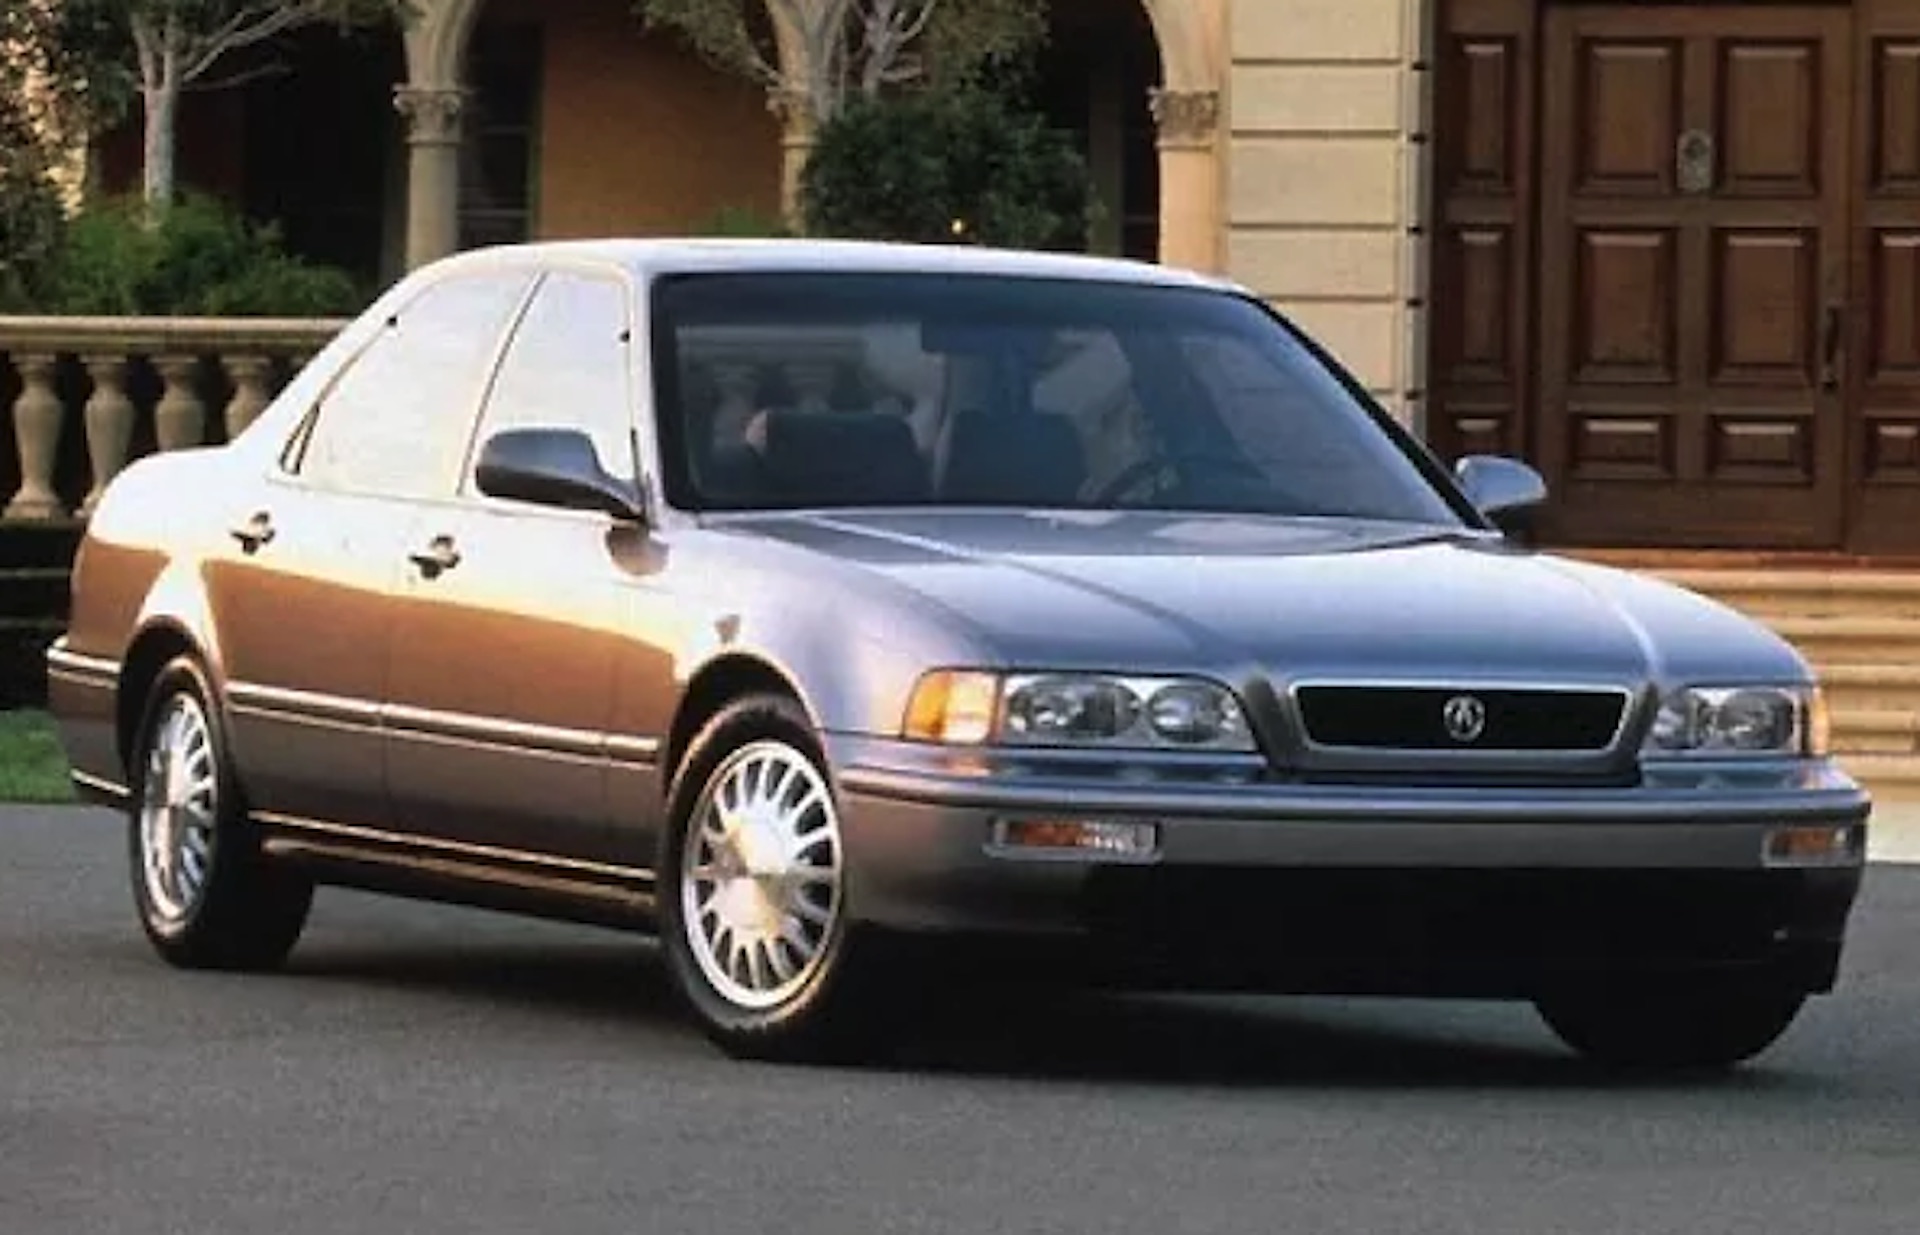 1992 Acura Legend 100 Cars That Matter